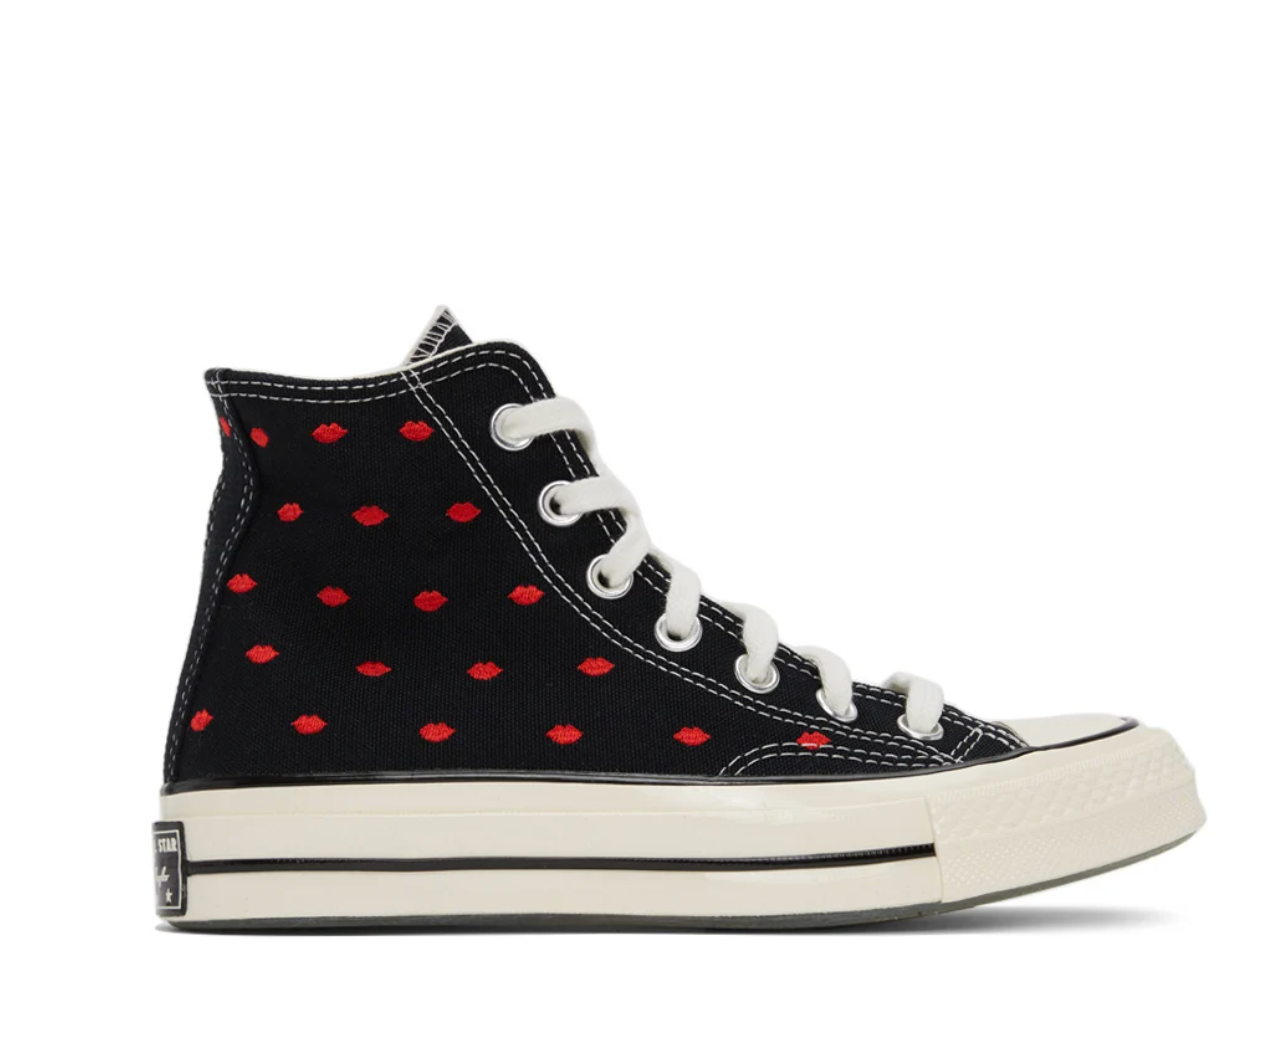 SSENSE's Up-To-50%-Off Sale Has GANNI, Converse, & More